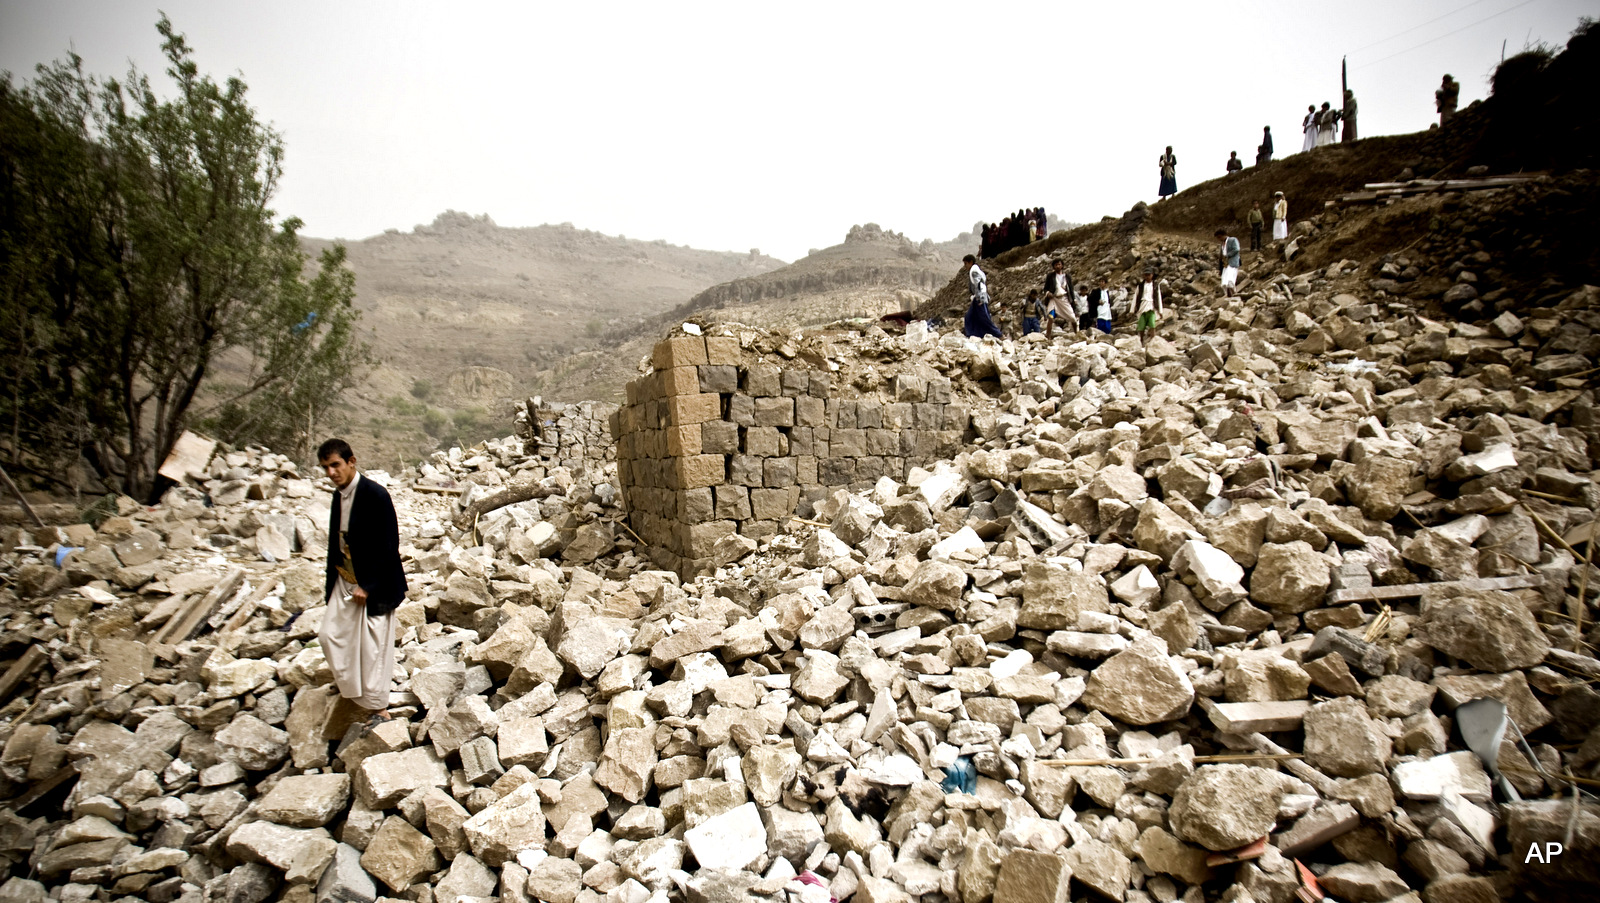 Yemenis search for survivors in the rubble of houses destroyed by Saudi-led airstrikes in a village near Sanaa, Yemen. Since their advance began last year, the Shiite rebels, known as Houthis have overrun Yemen's capital, Sanaa, and several provinces, forcing the country’s beleaguered President Abed Rabbo Mansour Hadi to flee the country. The Saudi-led coalition continued to carry out intensive airstrikes overnight and early Saturday morning targeting Houthi positions.